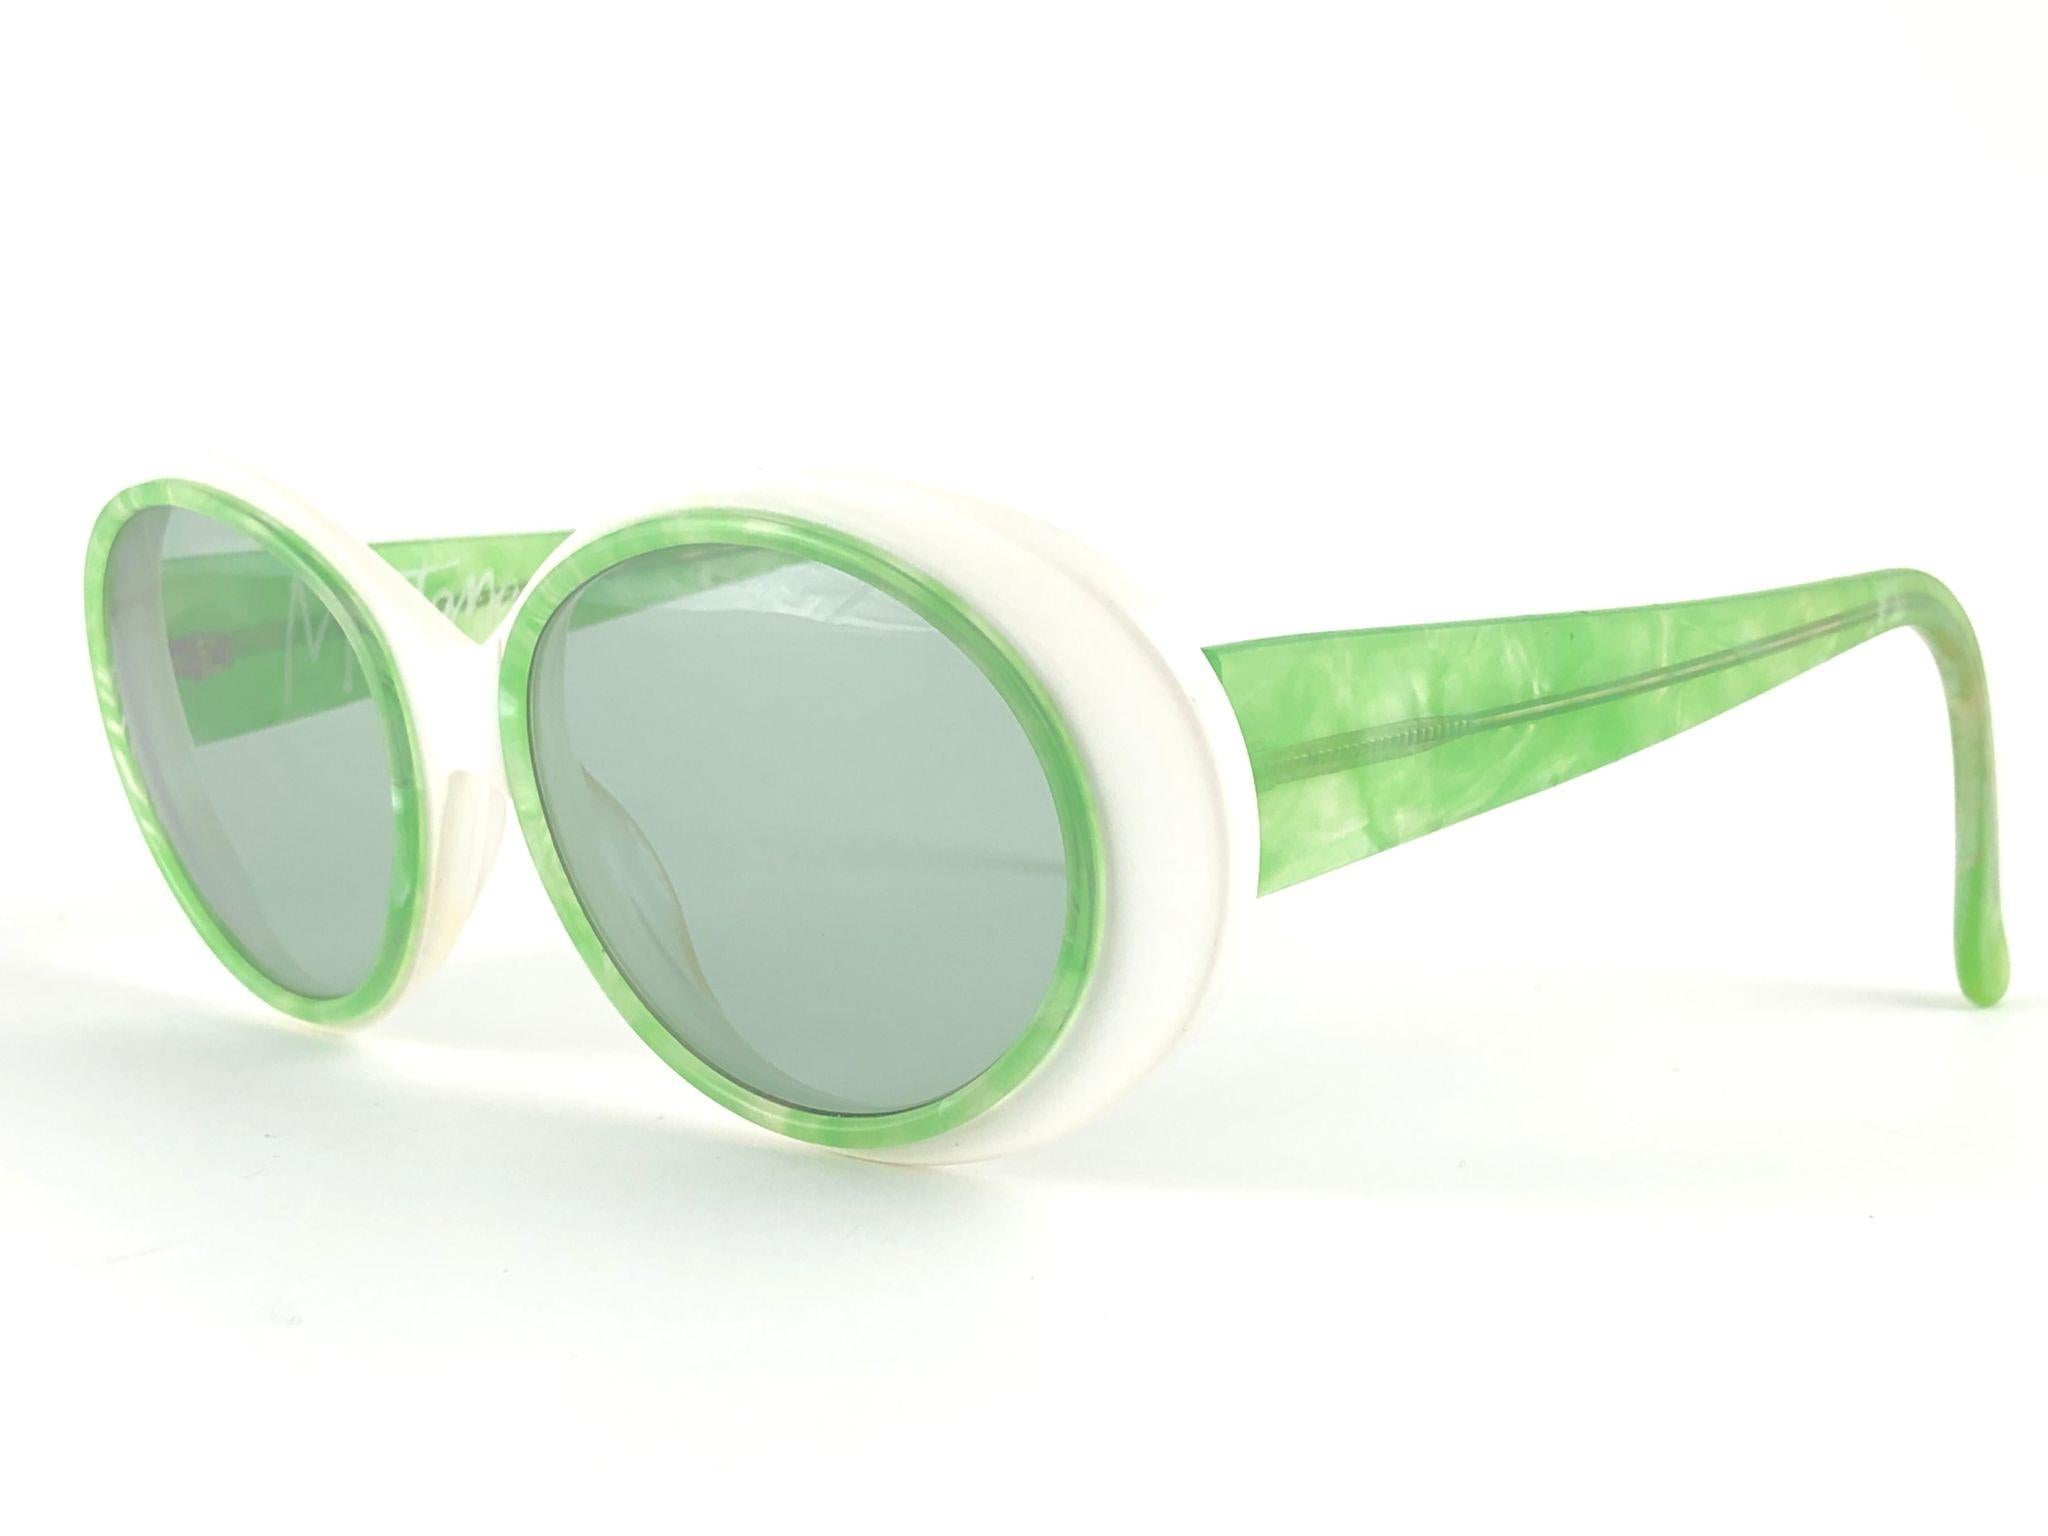 New Vintage Montana Oval white frame and Marbled light green temples.

This item is in unworn condition. Please consider that this item is nearly 30 years old so it could show minor sign of wear due to storage.  

Hand Made in